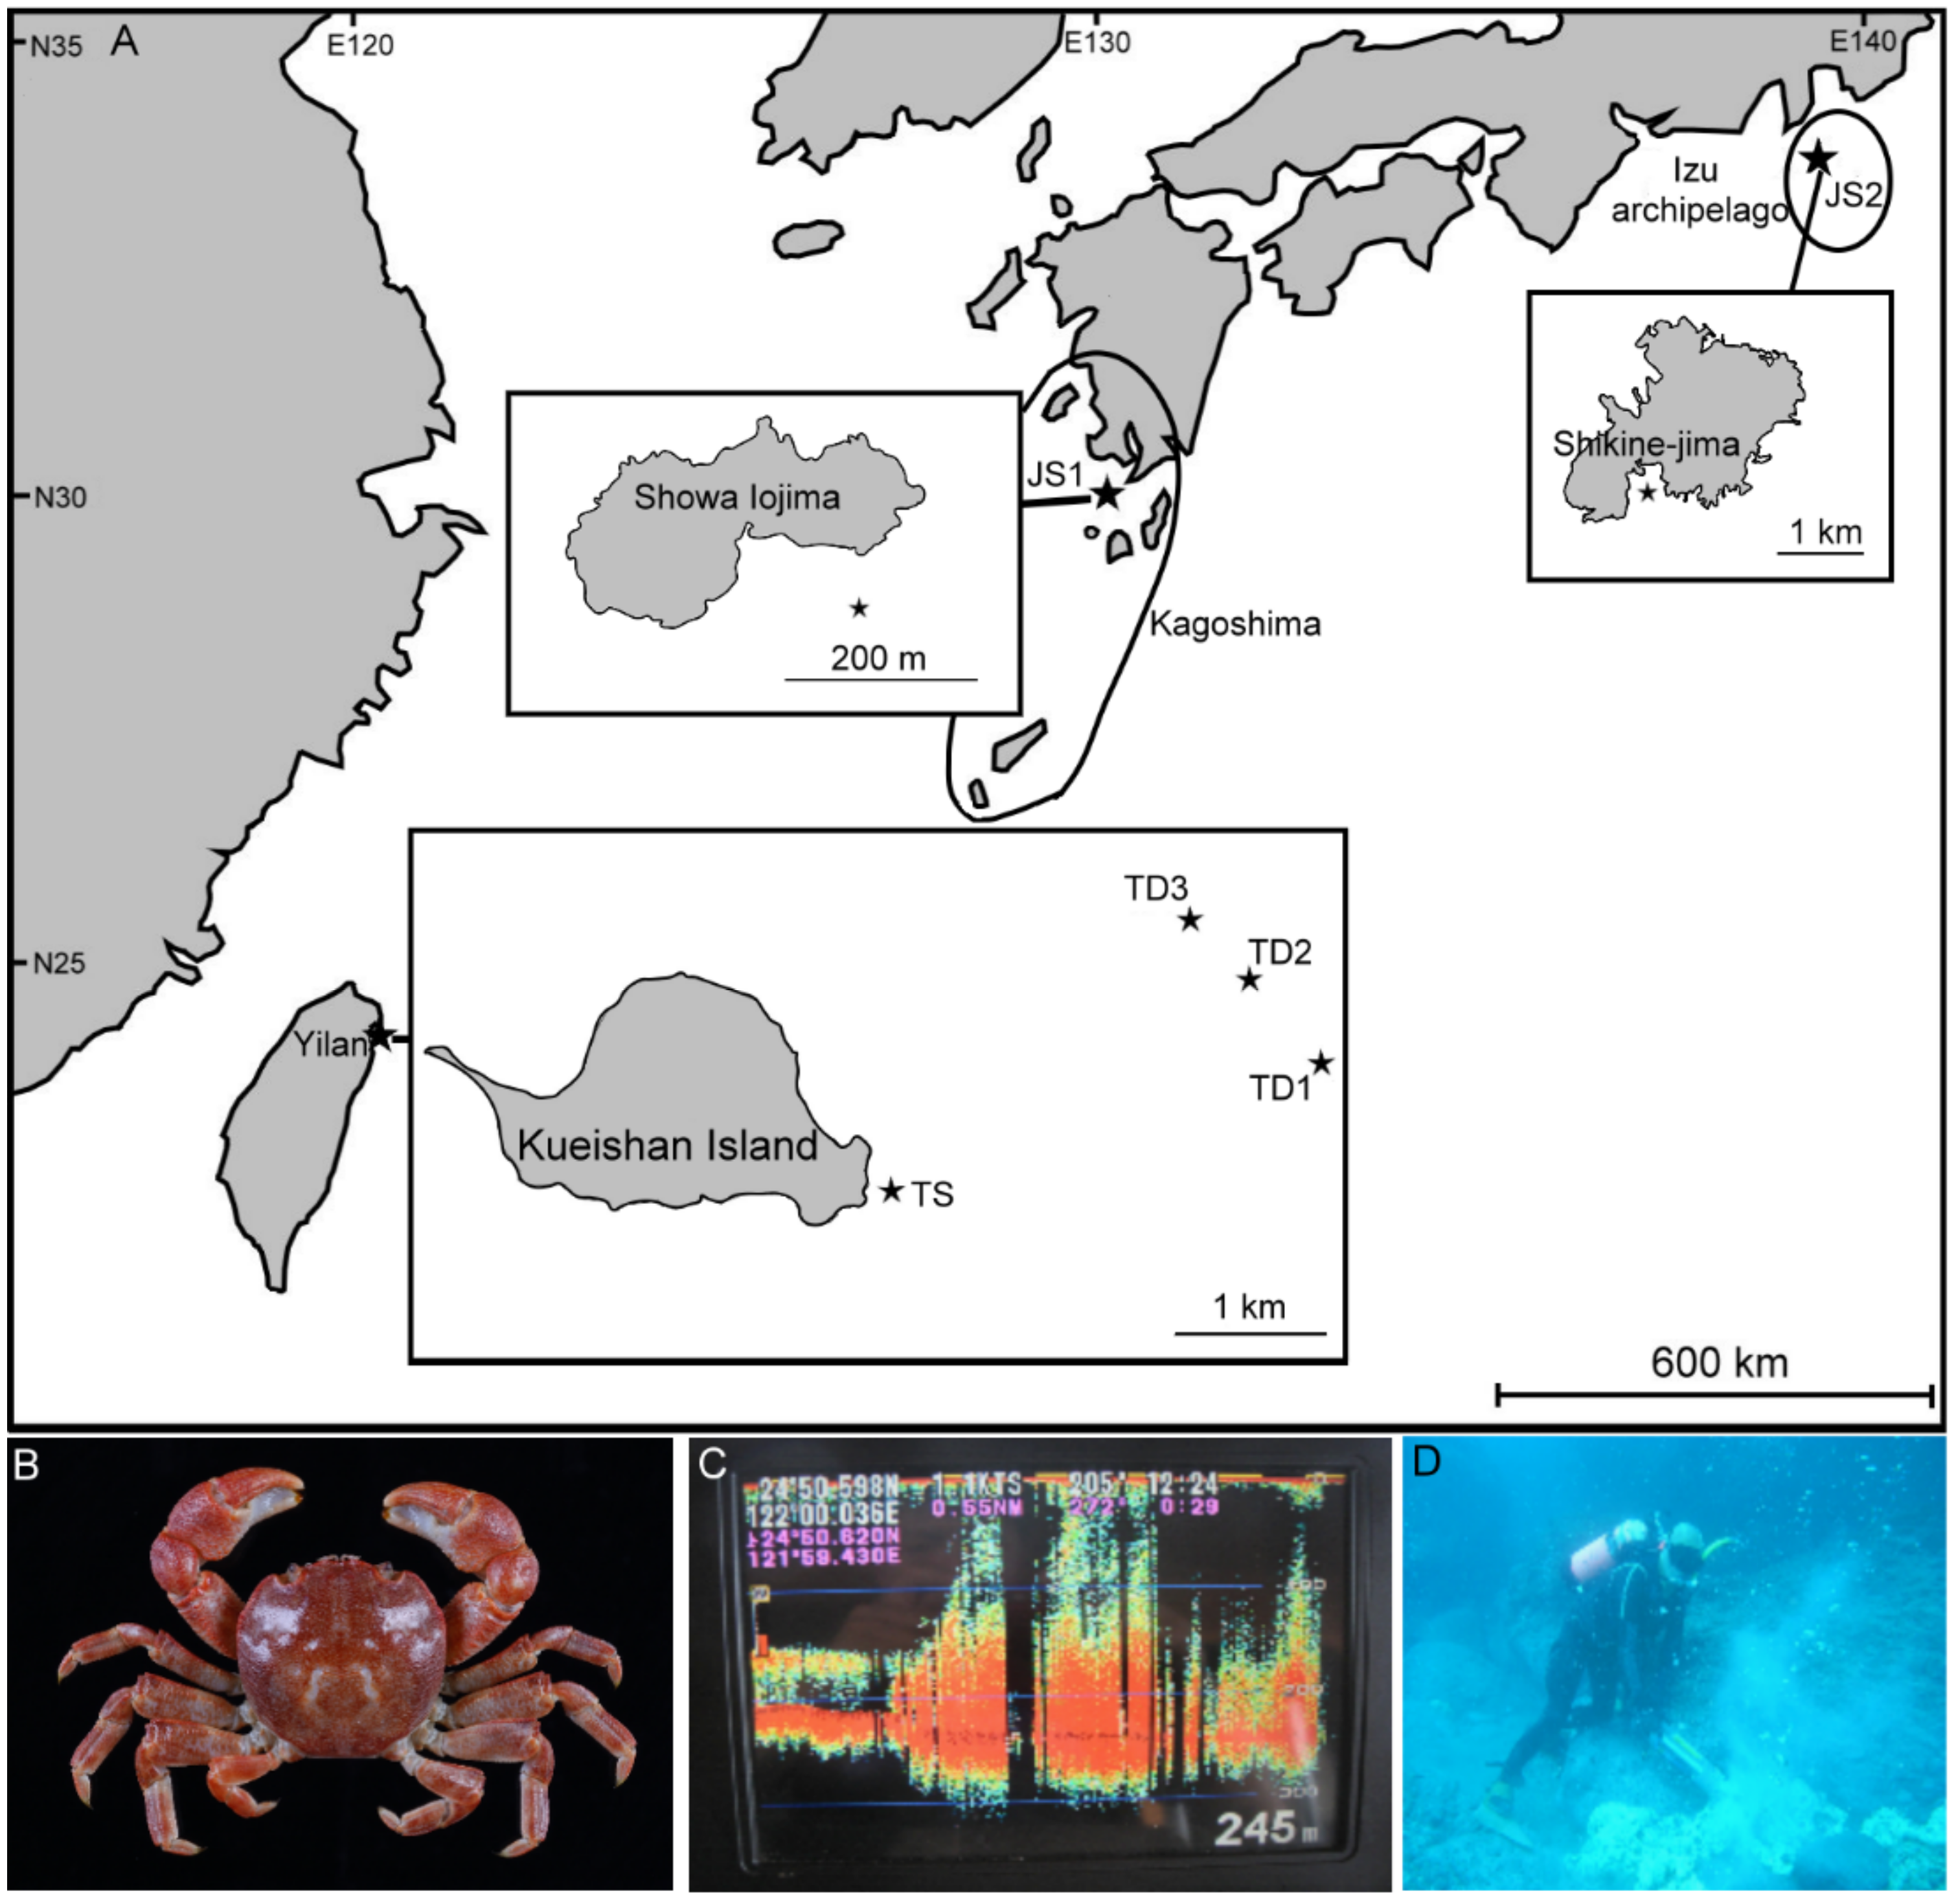 The density of the crustaceans (Crustacea) of the DCS based on Triple-D